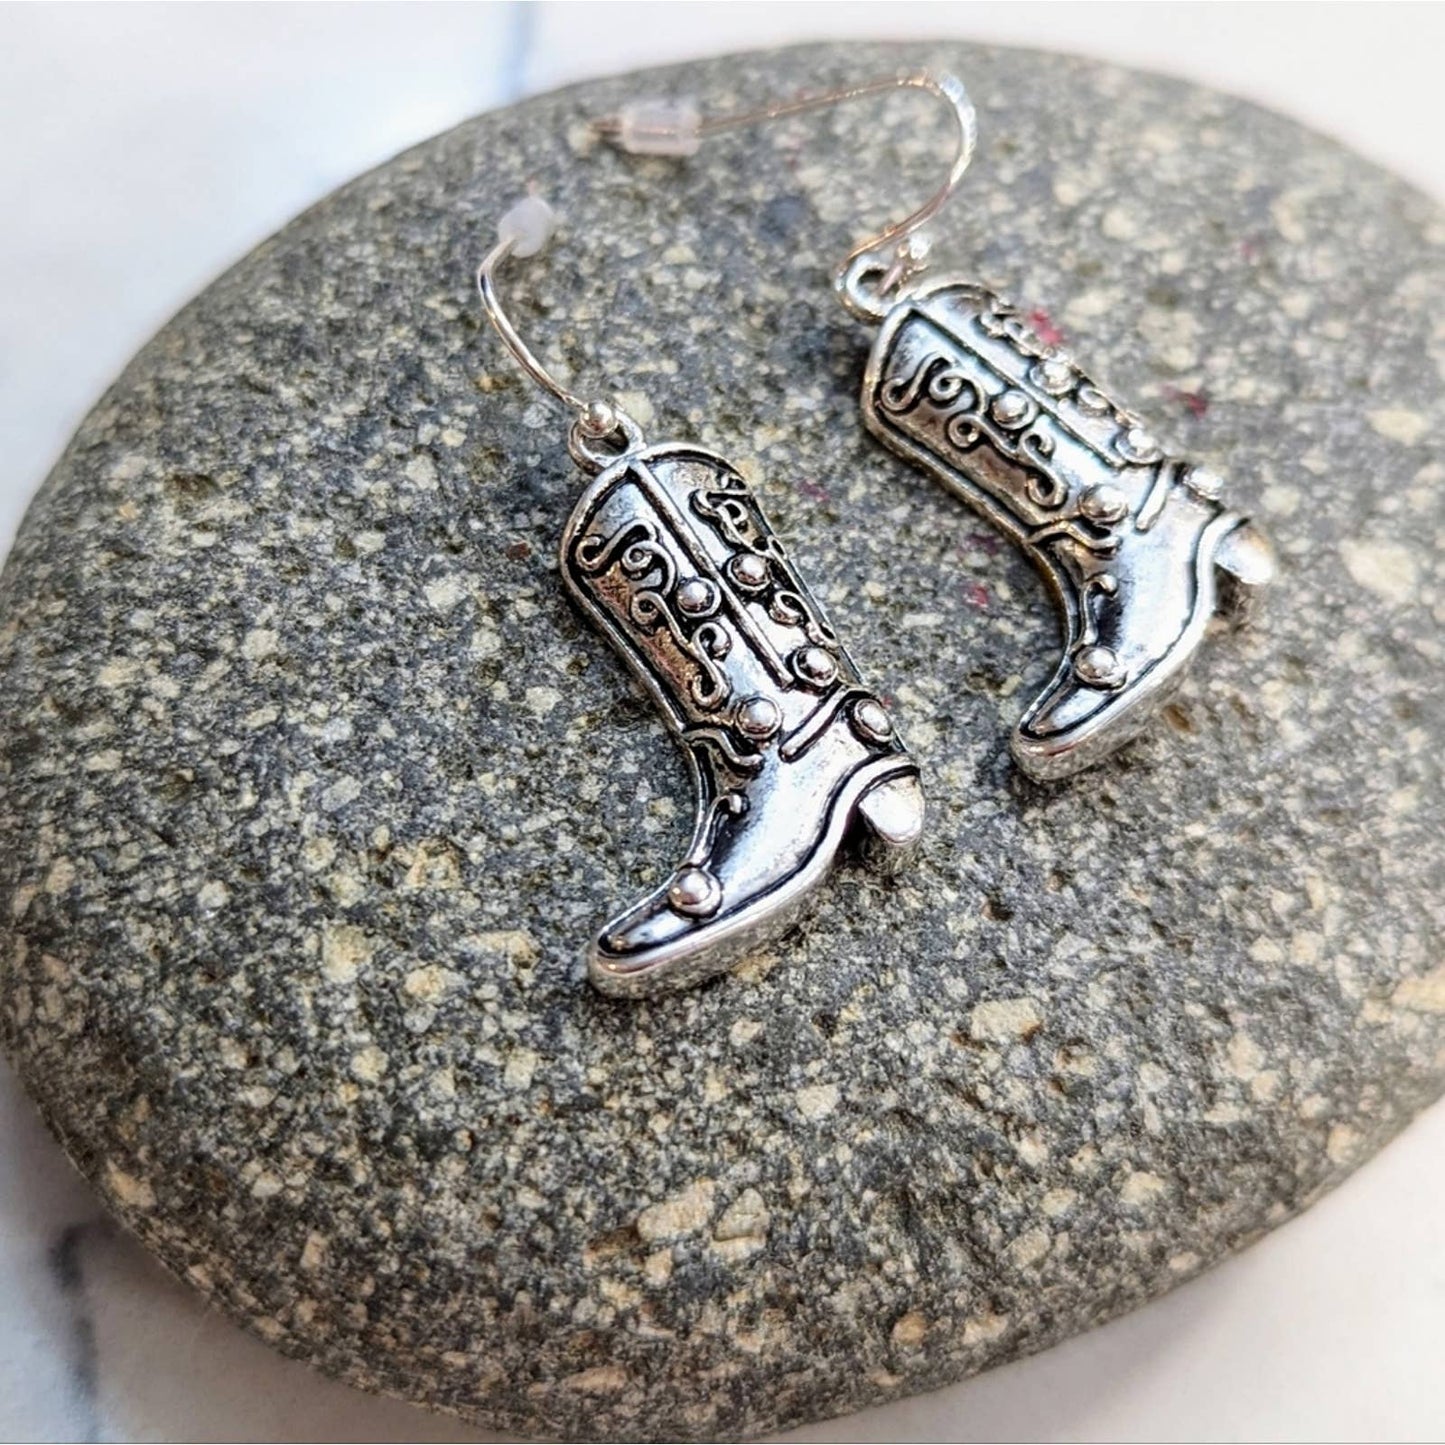 Silver Western Cowgirl Cowboy Boot Hook Earrings with a Distressed Look